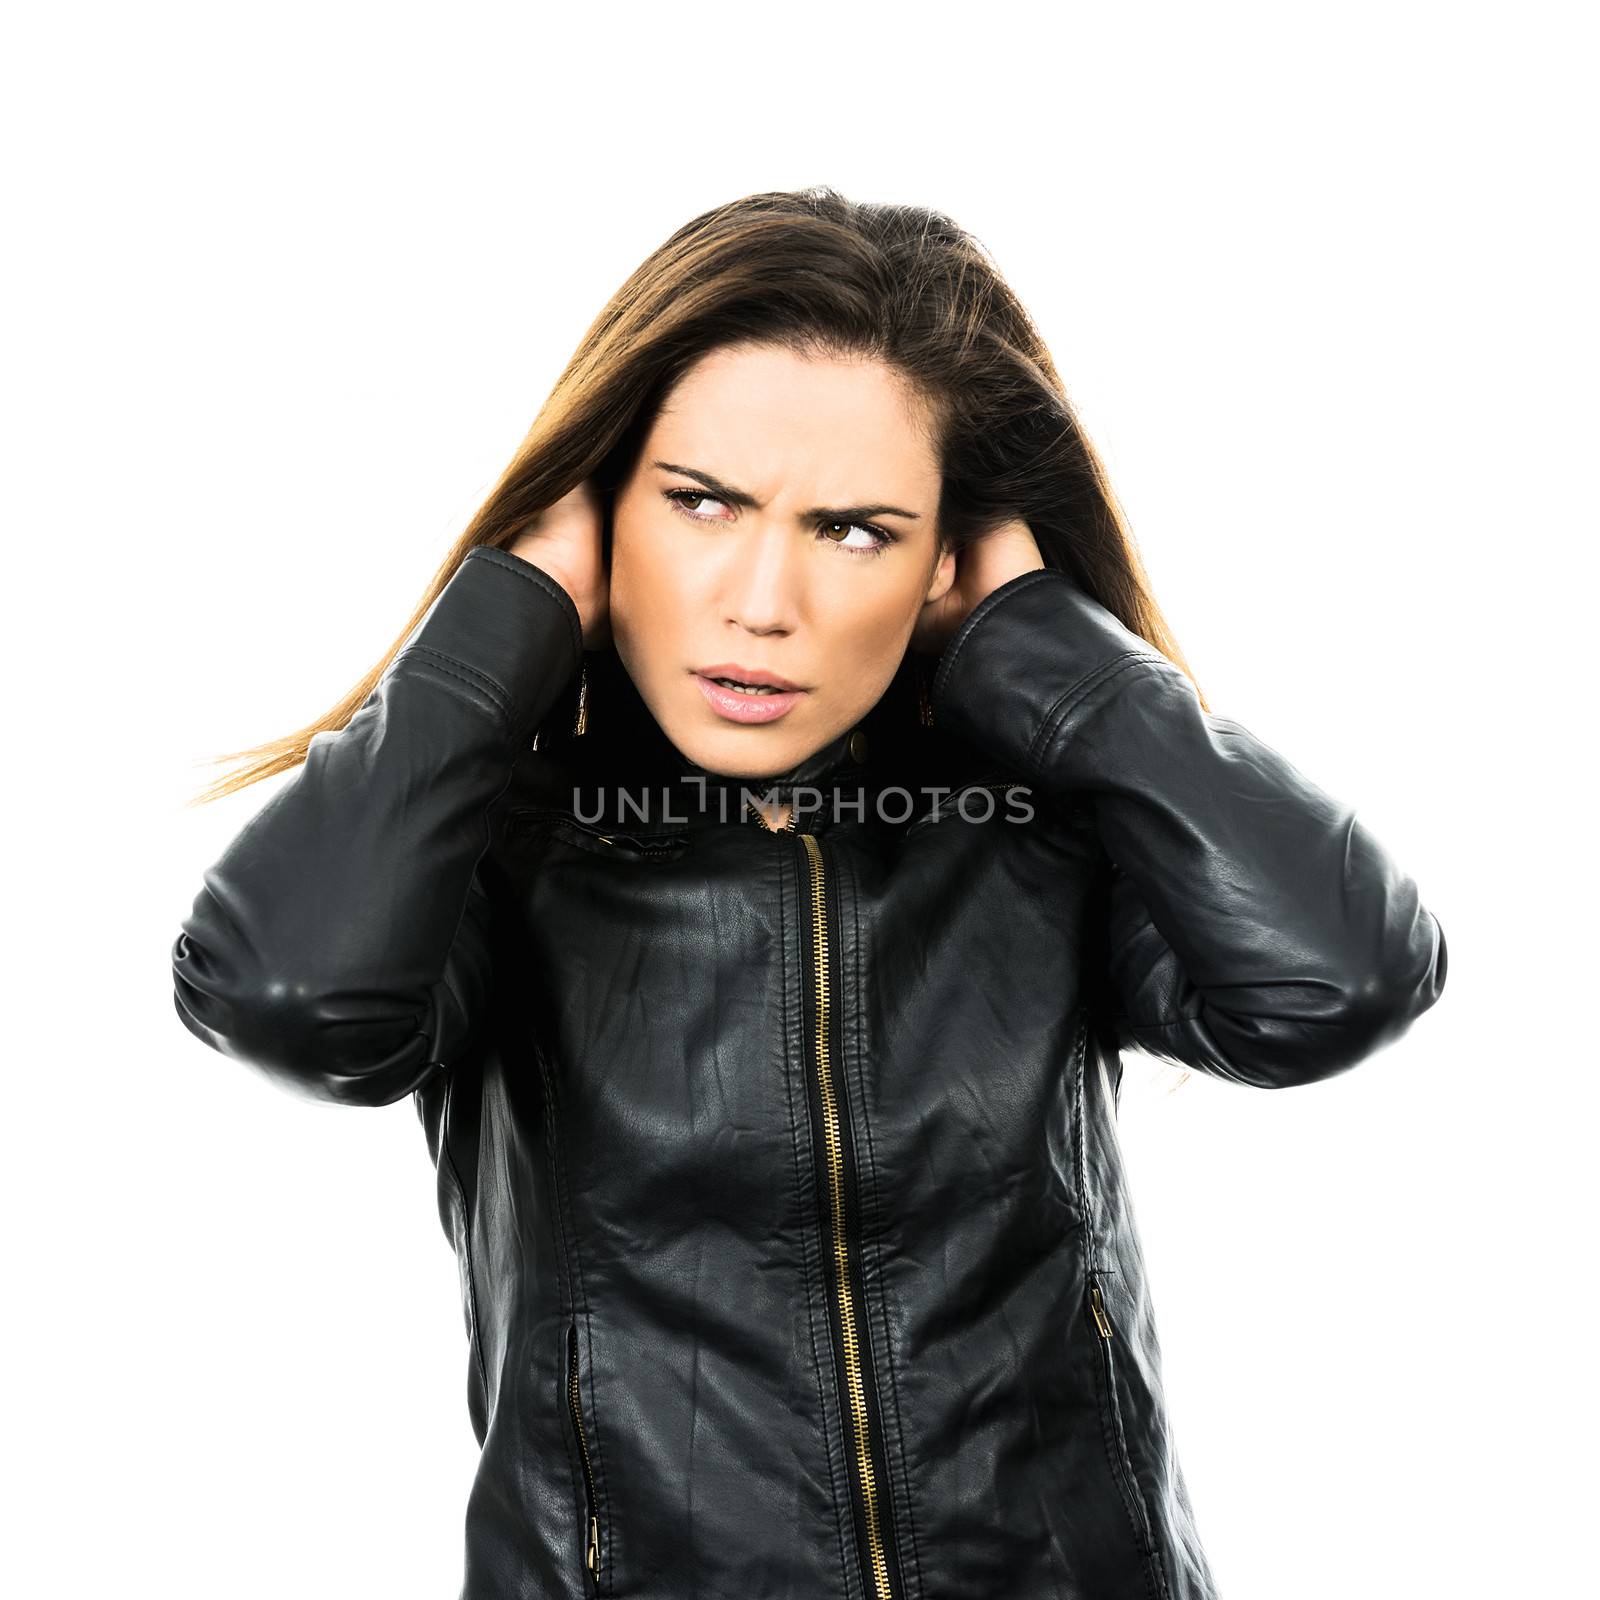 pretty stressed young woman with leather jacket